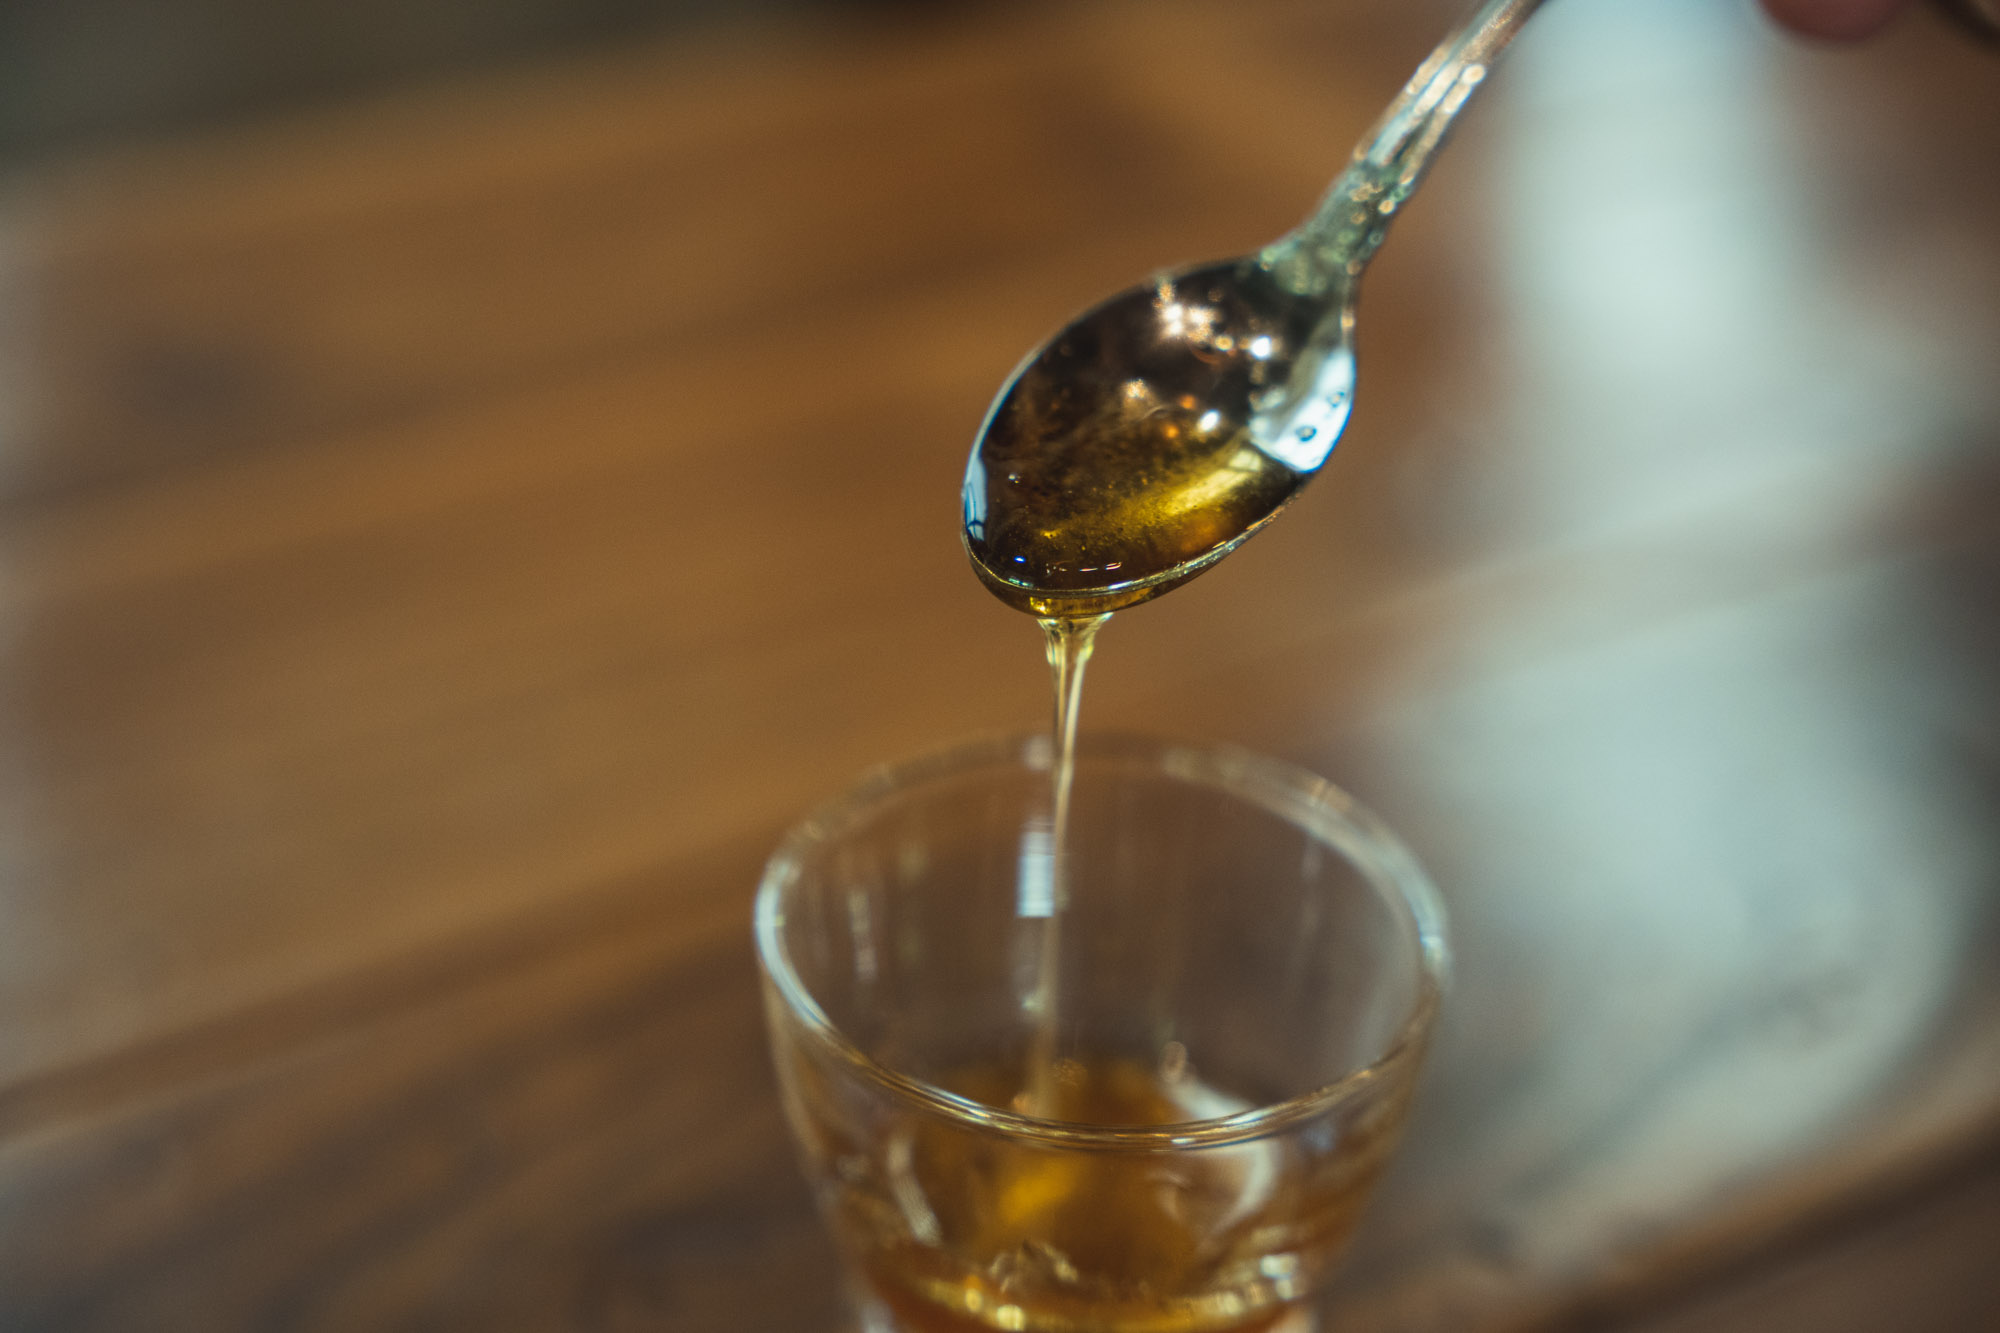 Honey made by Mr. Miura is less thick and sticky than regular honey and melts easily on your tongue.